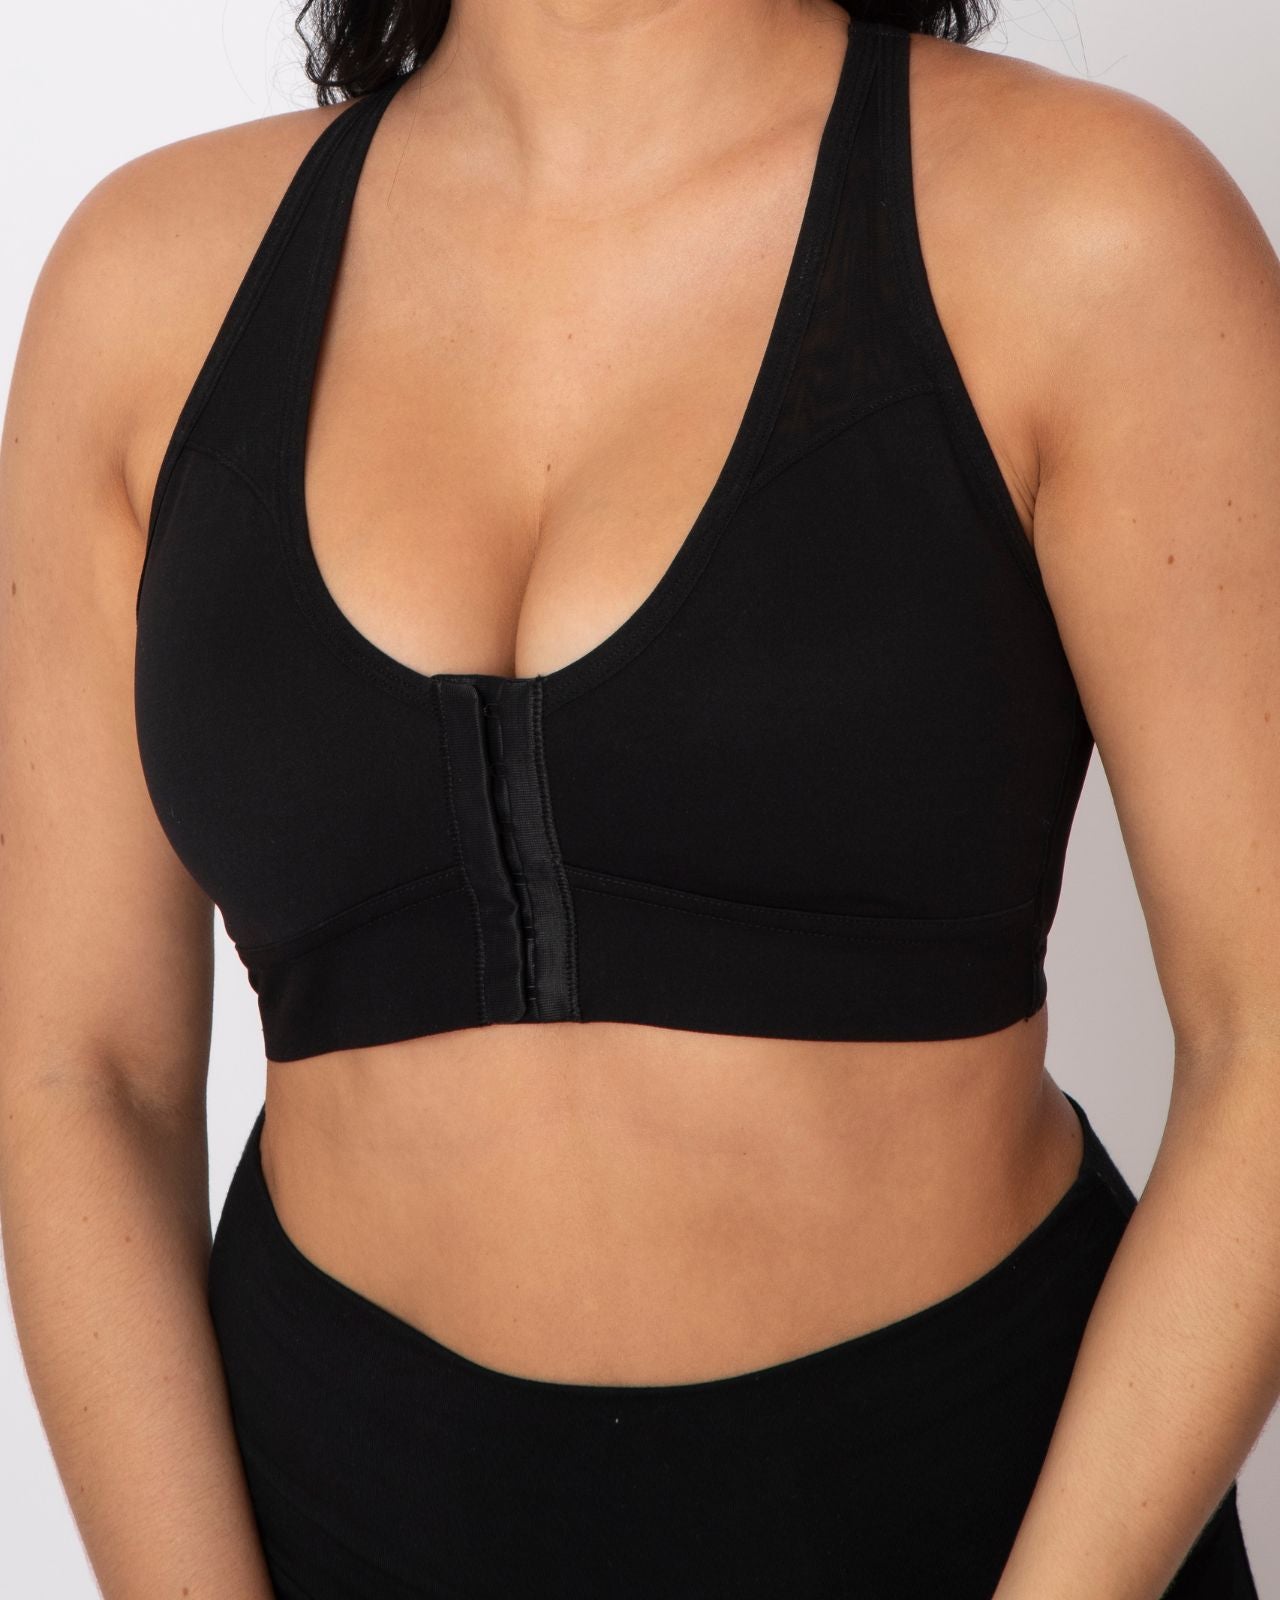 bebe intimates black sports bra with net front size S/CH